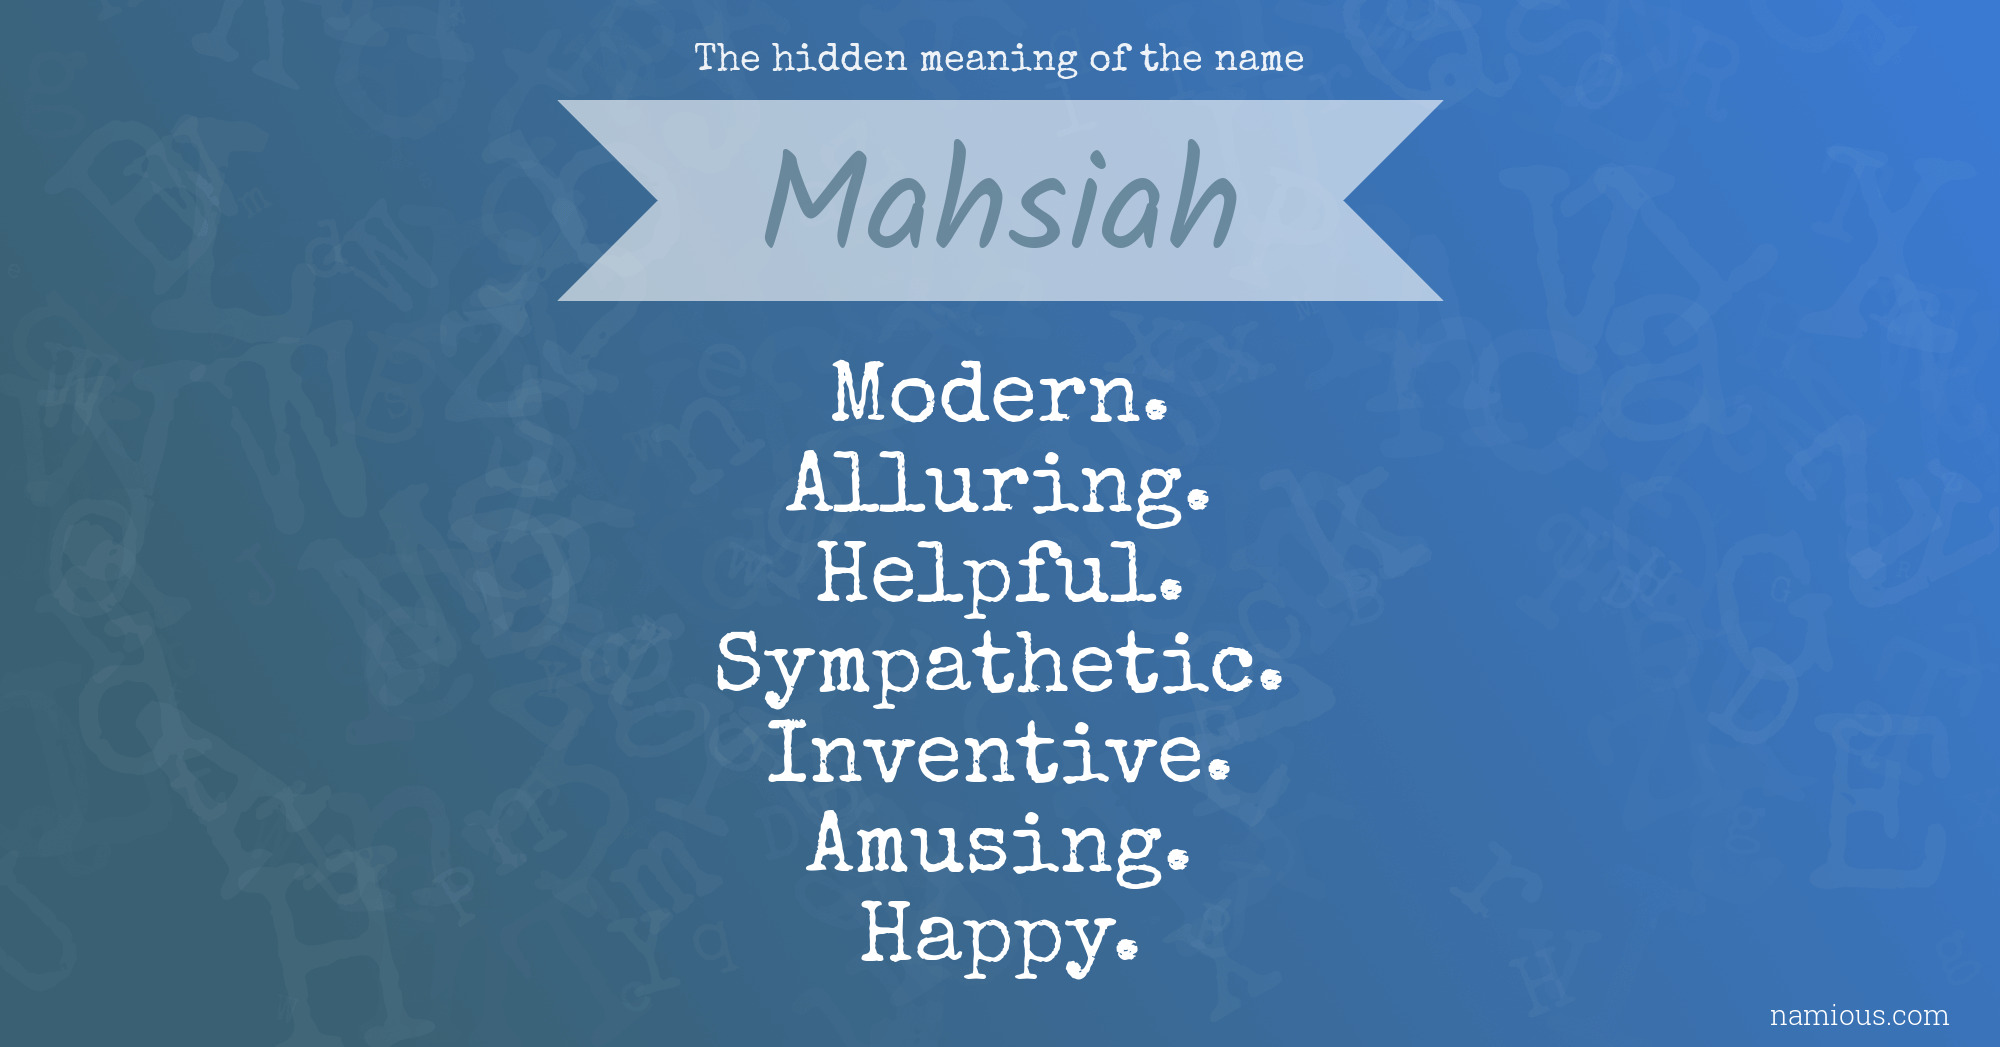 The hidden meaning of the name Mahsiah